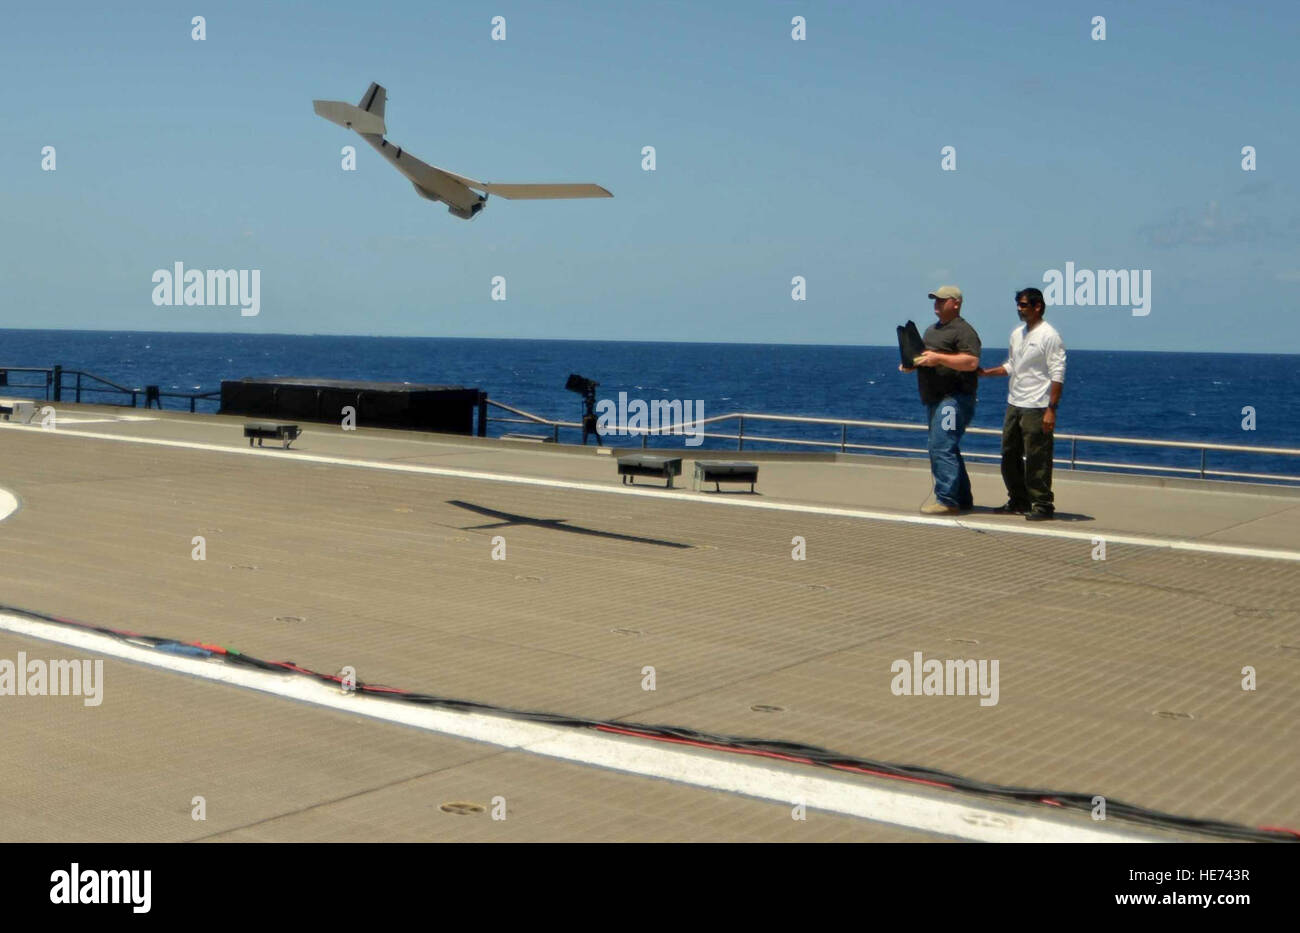 Justin Sellers, left, an unmanned air systems flight operator, lands a Puma unmanned aircraft system as fellow operator Stu Orozco looks on aboard high speed vessel Swift (HSV-2) April 25, 2013, in the Caribbean Sea near Key West, Fla. The Puma?s flight was part of an at-sea demonstration of future counter-transnational organized crime operations as part of Operation Martillo. Martillo is a joint, interagency and multinational collaborative effort to deny transnational criminal organizations air and maritime access to the littoral regions of the Central American isthmus.  Master-at-Arms Seaman Stock Photo